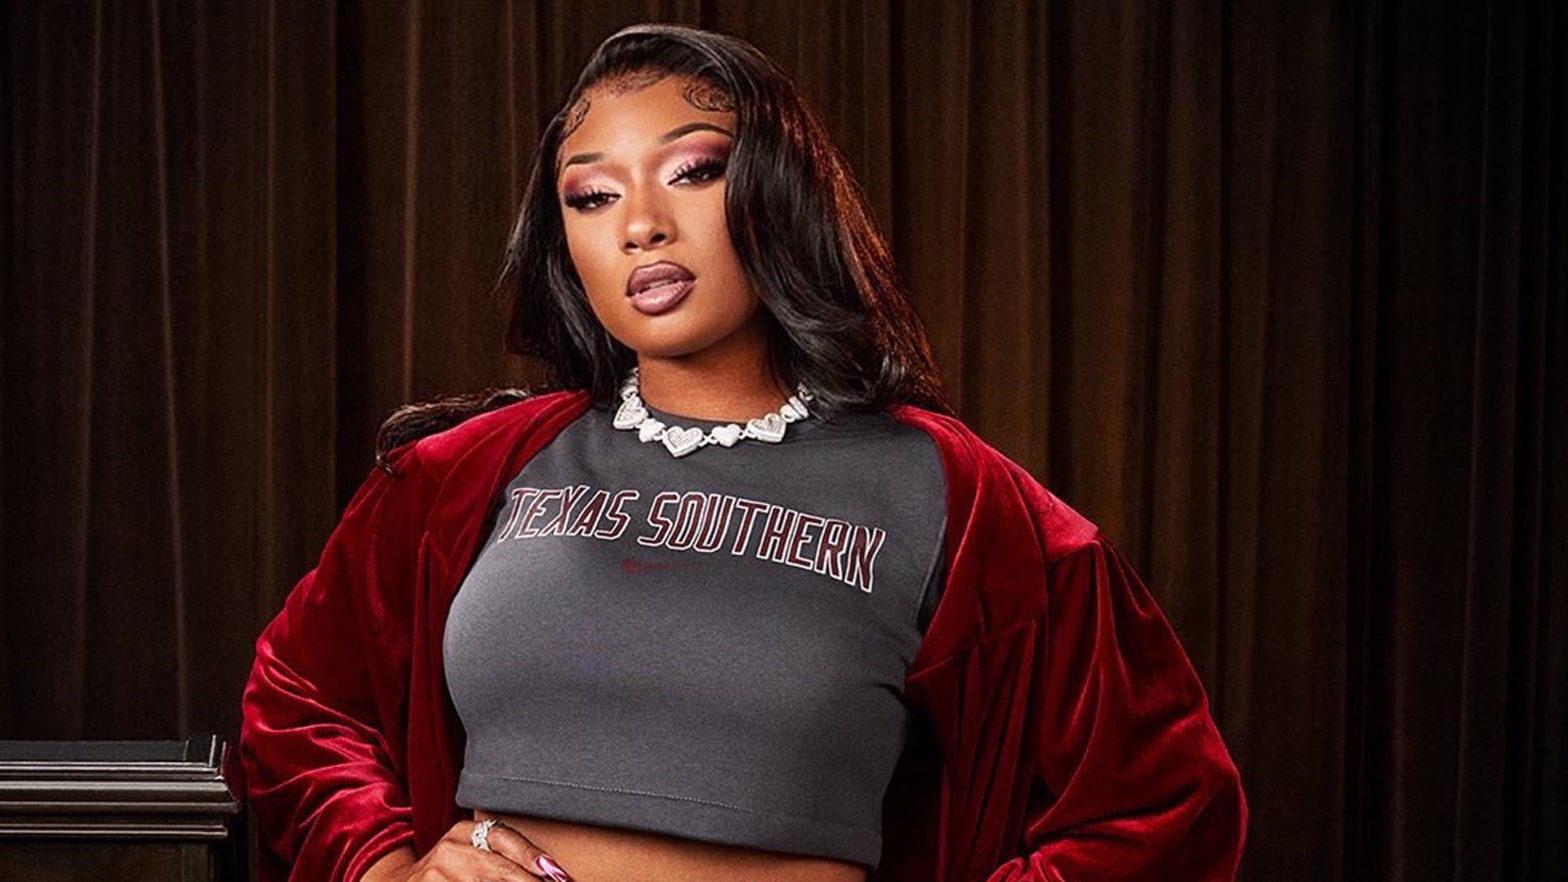 Megan Thee Stallion Causes Uptick In Enrollment At Her HBCU Alma Mater Texas Southern University